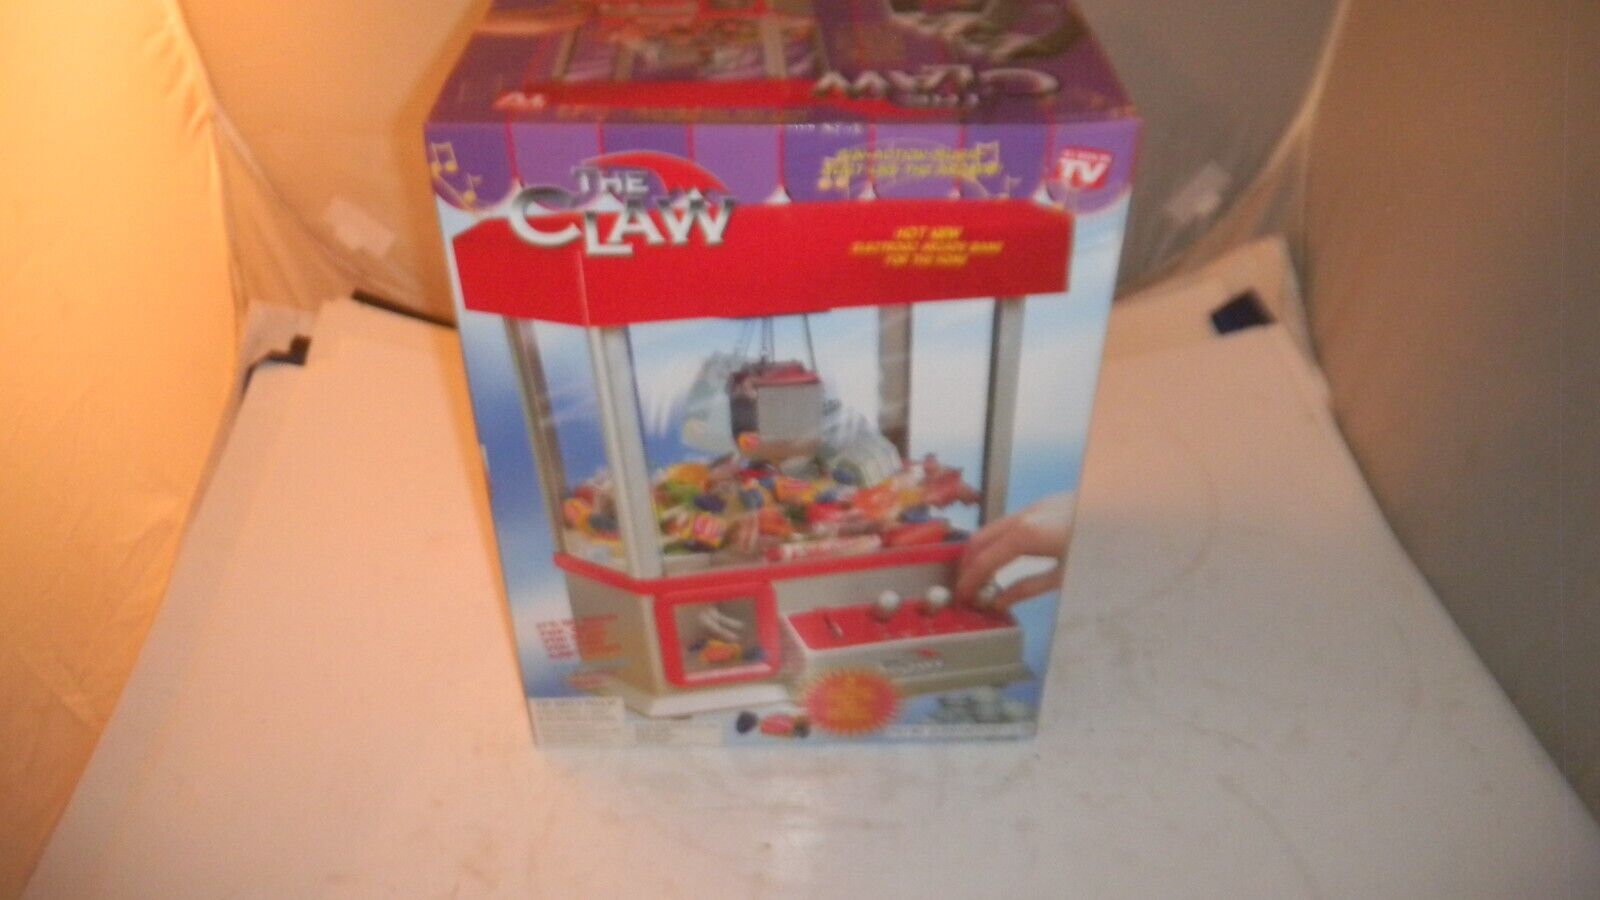 The Claw Electronic Arcade Game